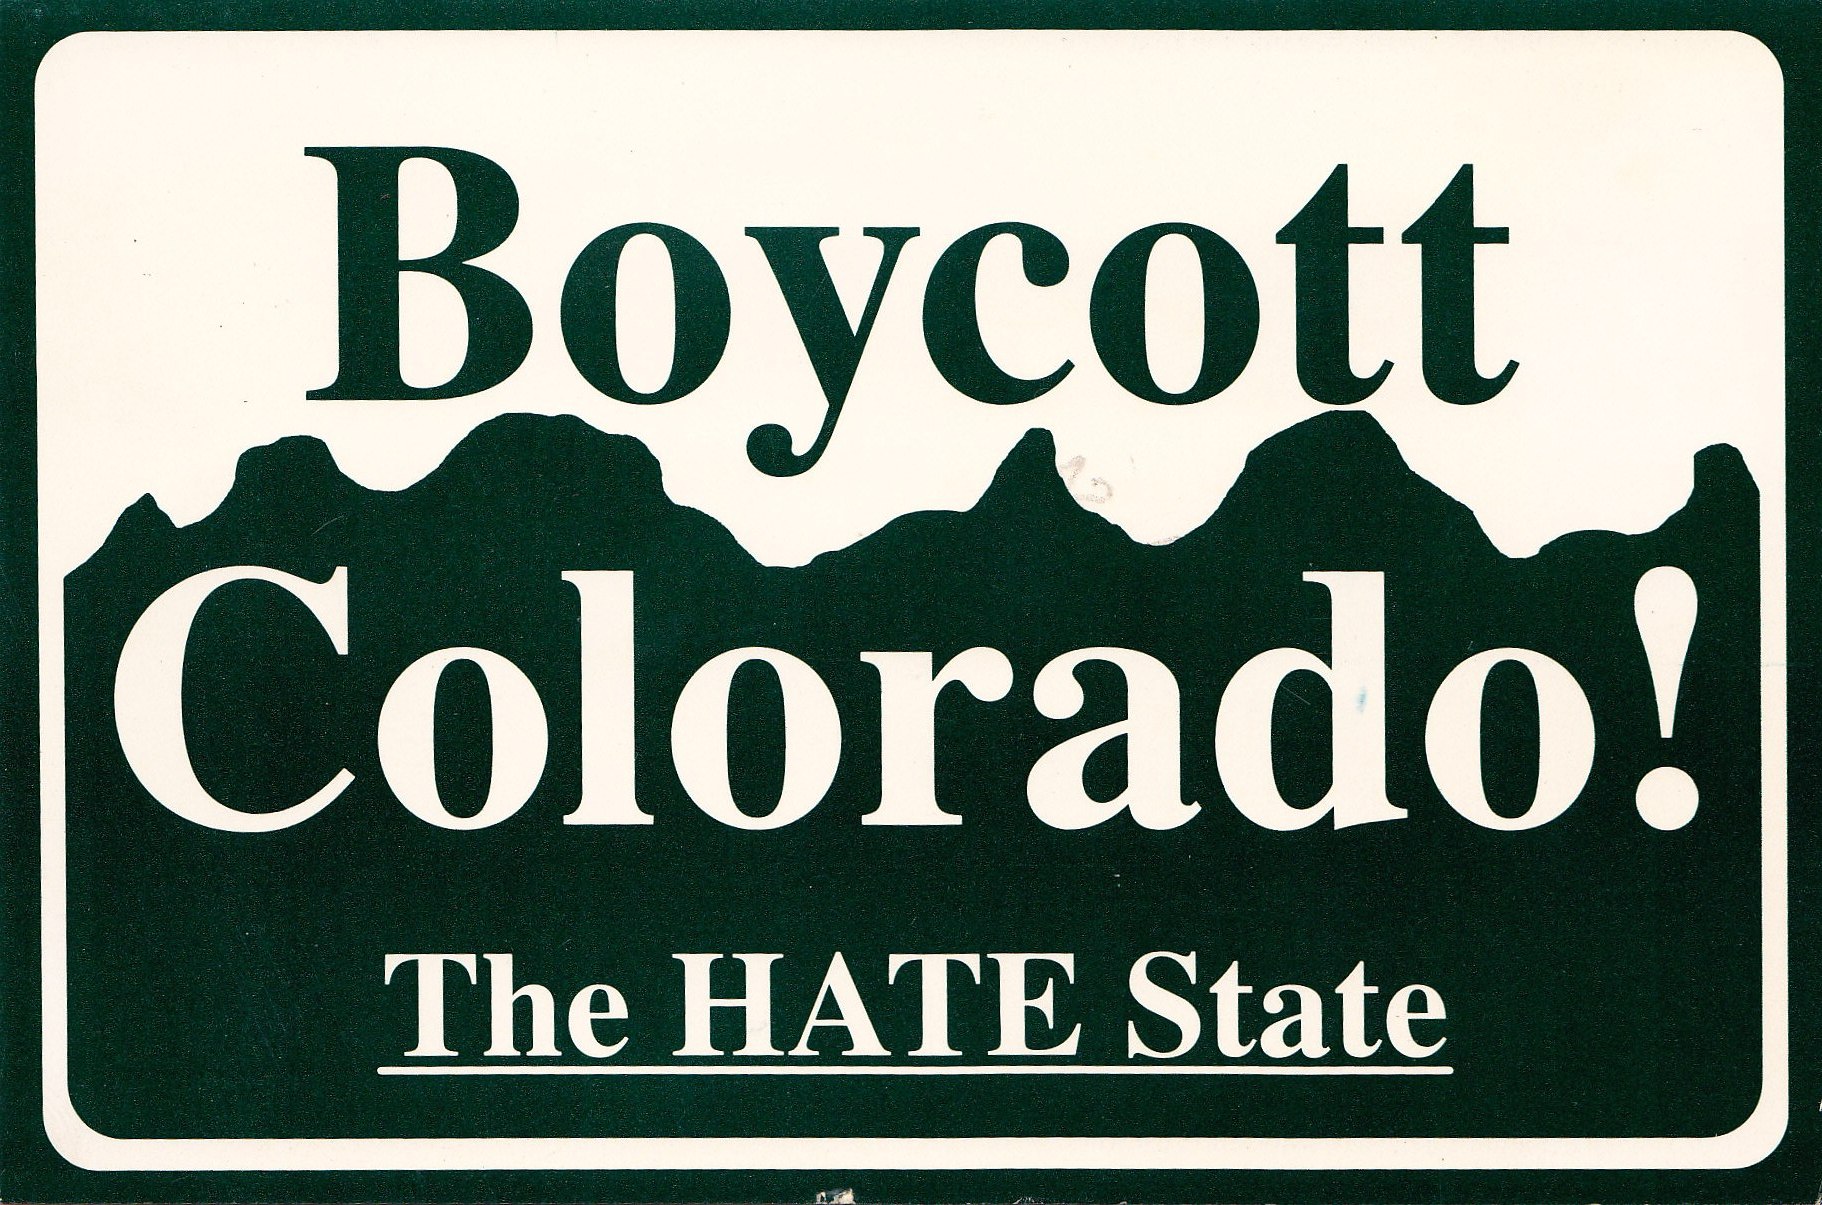 Image of a sign or sticker that says "Boycott Colorado! The HATE State" set against the iconic green and white Colorado license plate design.